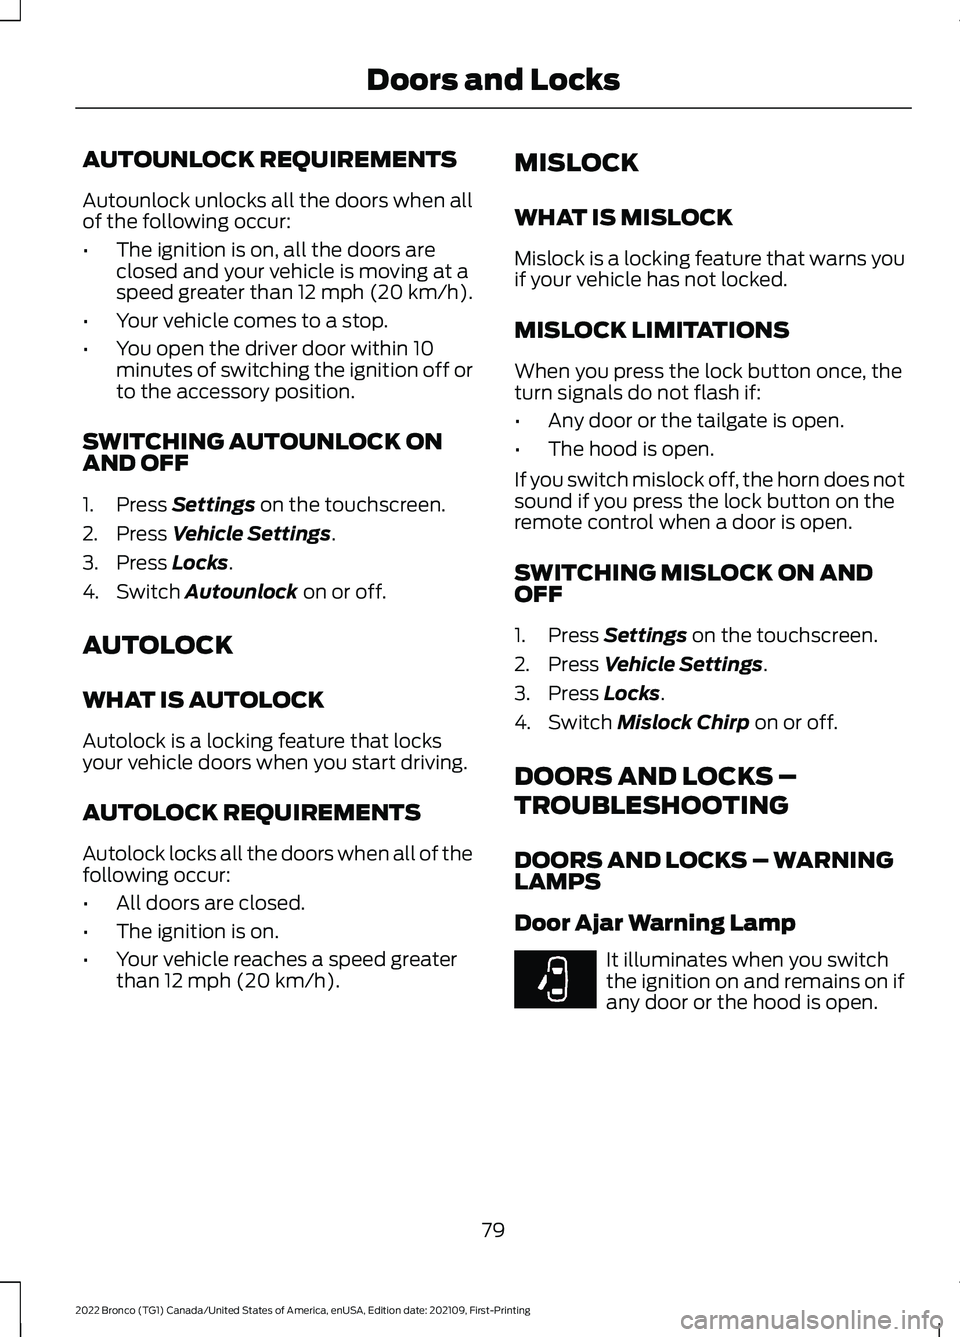 FORD BRONCO 2022  Owners Manual AUTOUNLOCK REQUIREMENTS
Autounlock unlocks all the doors when allof the following occur:
•The ignition is on, all the doors areclosed and your vehicle is moving at aspeed greater than 12 mph (20 km/